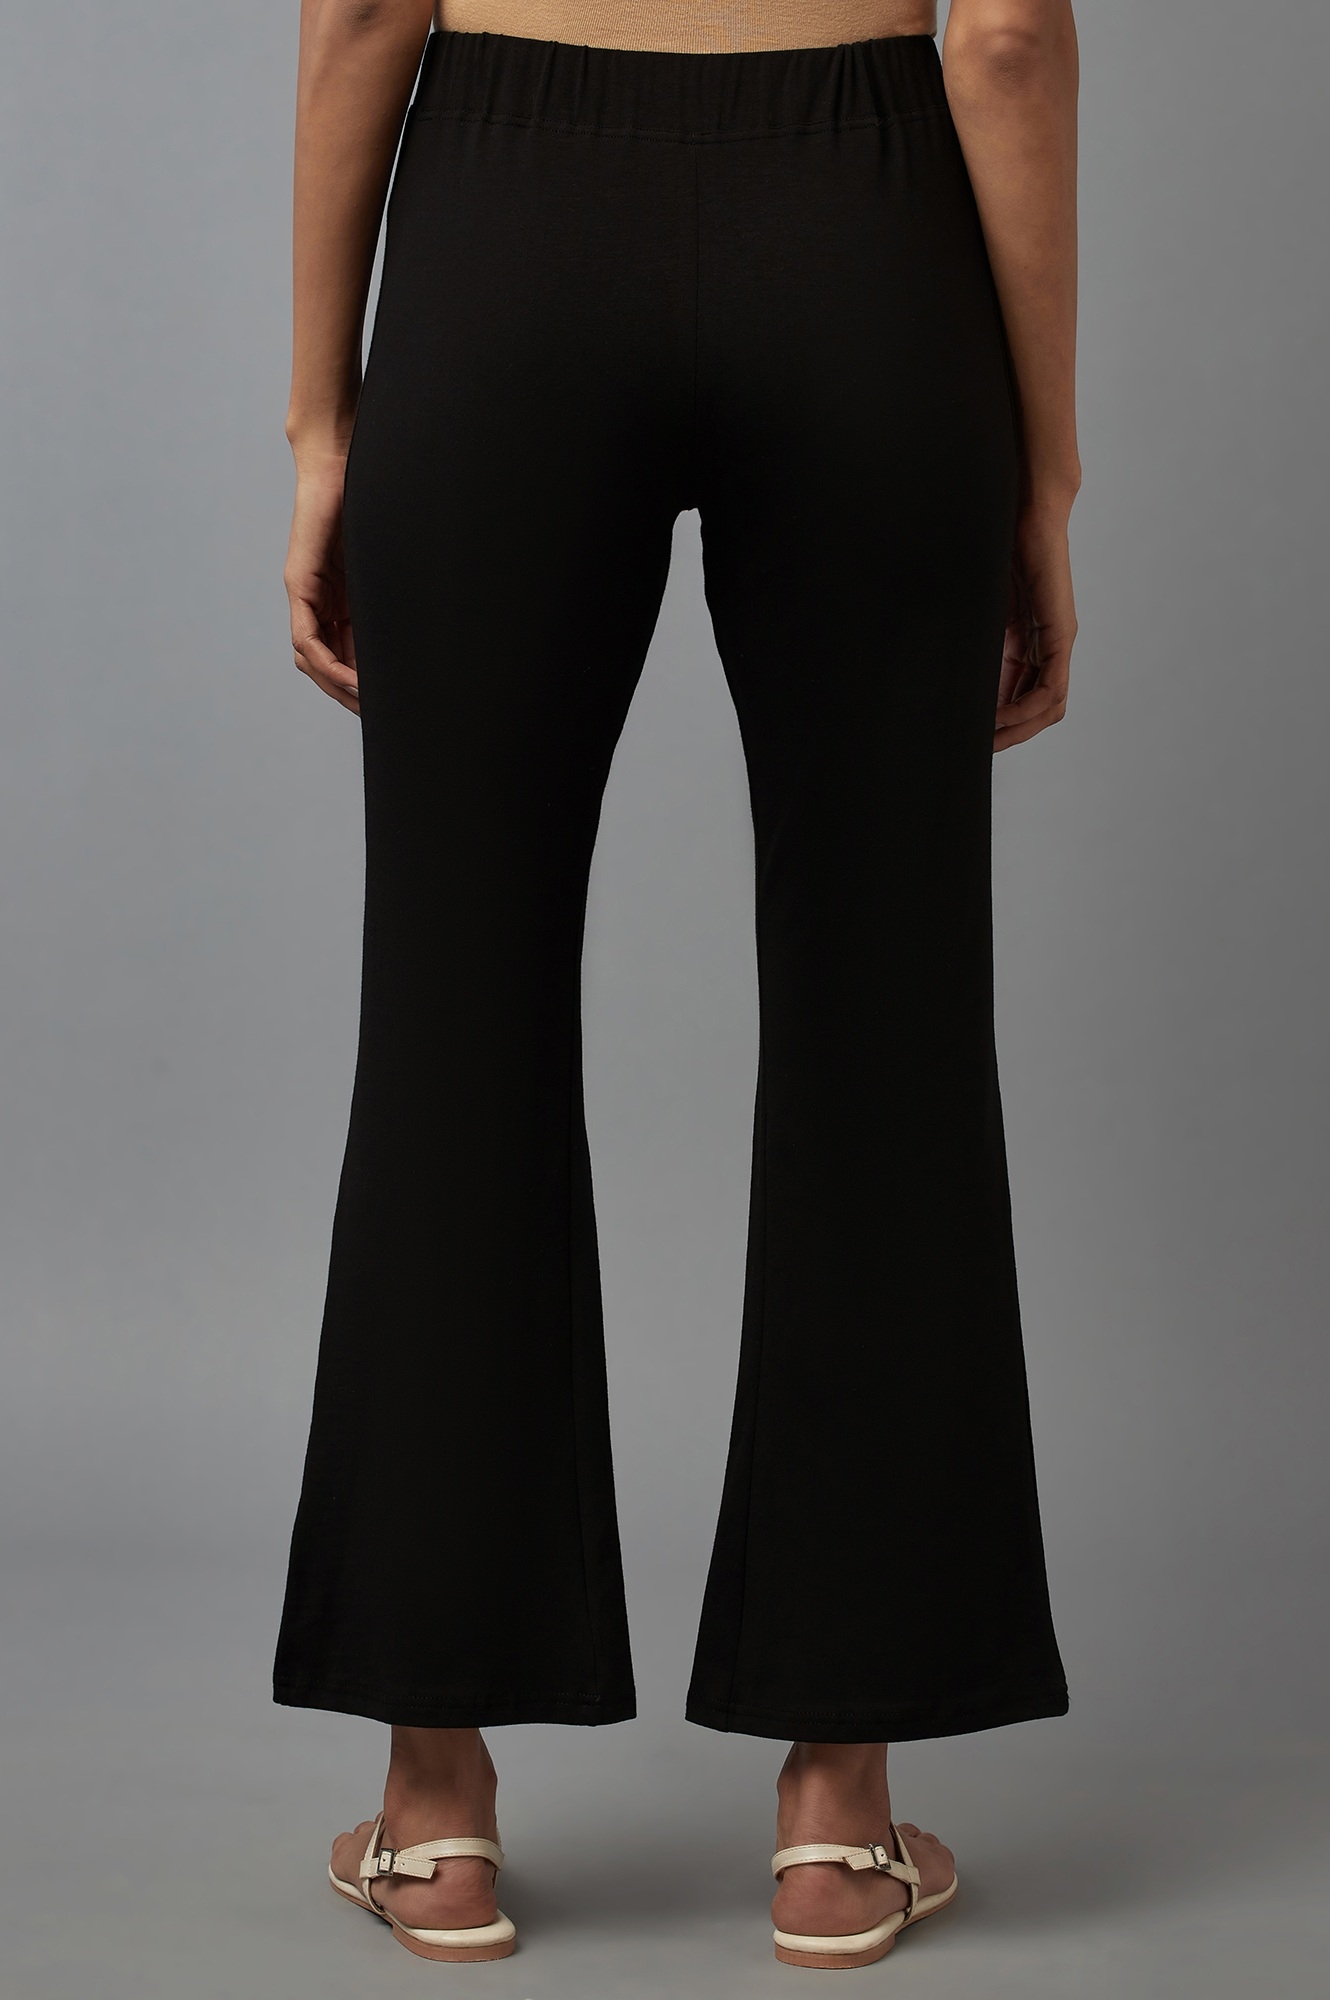 Buy track pants in black color for women at Inwear.in